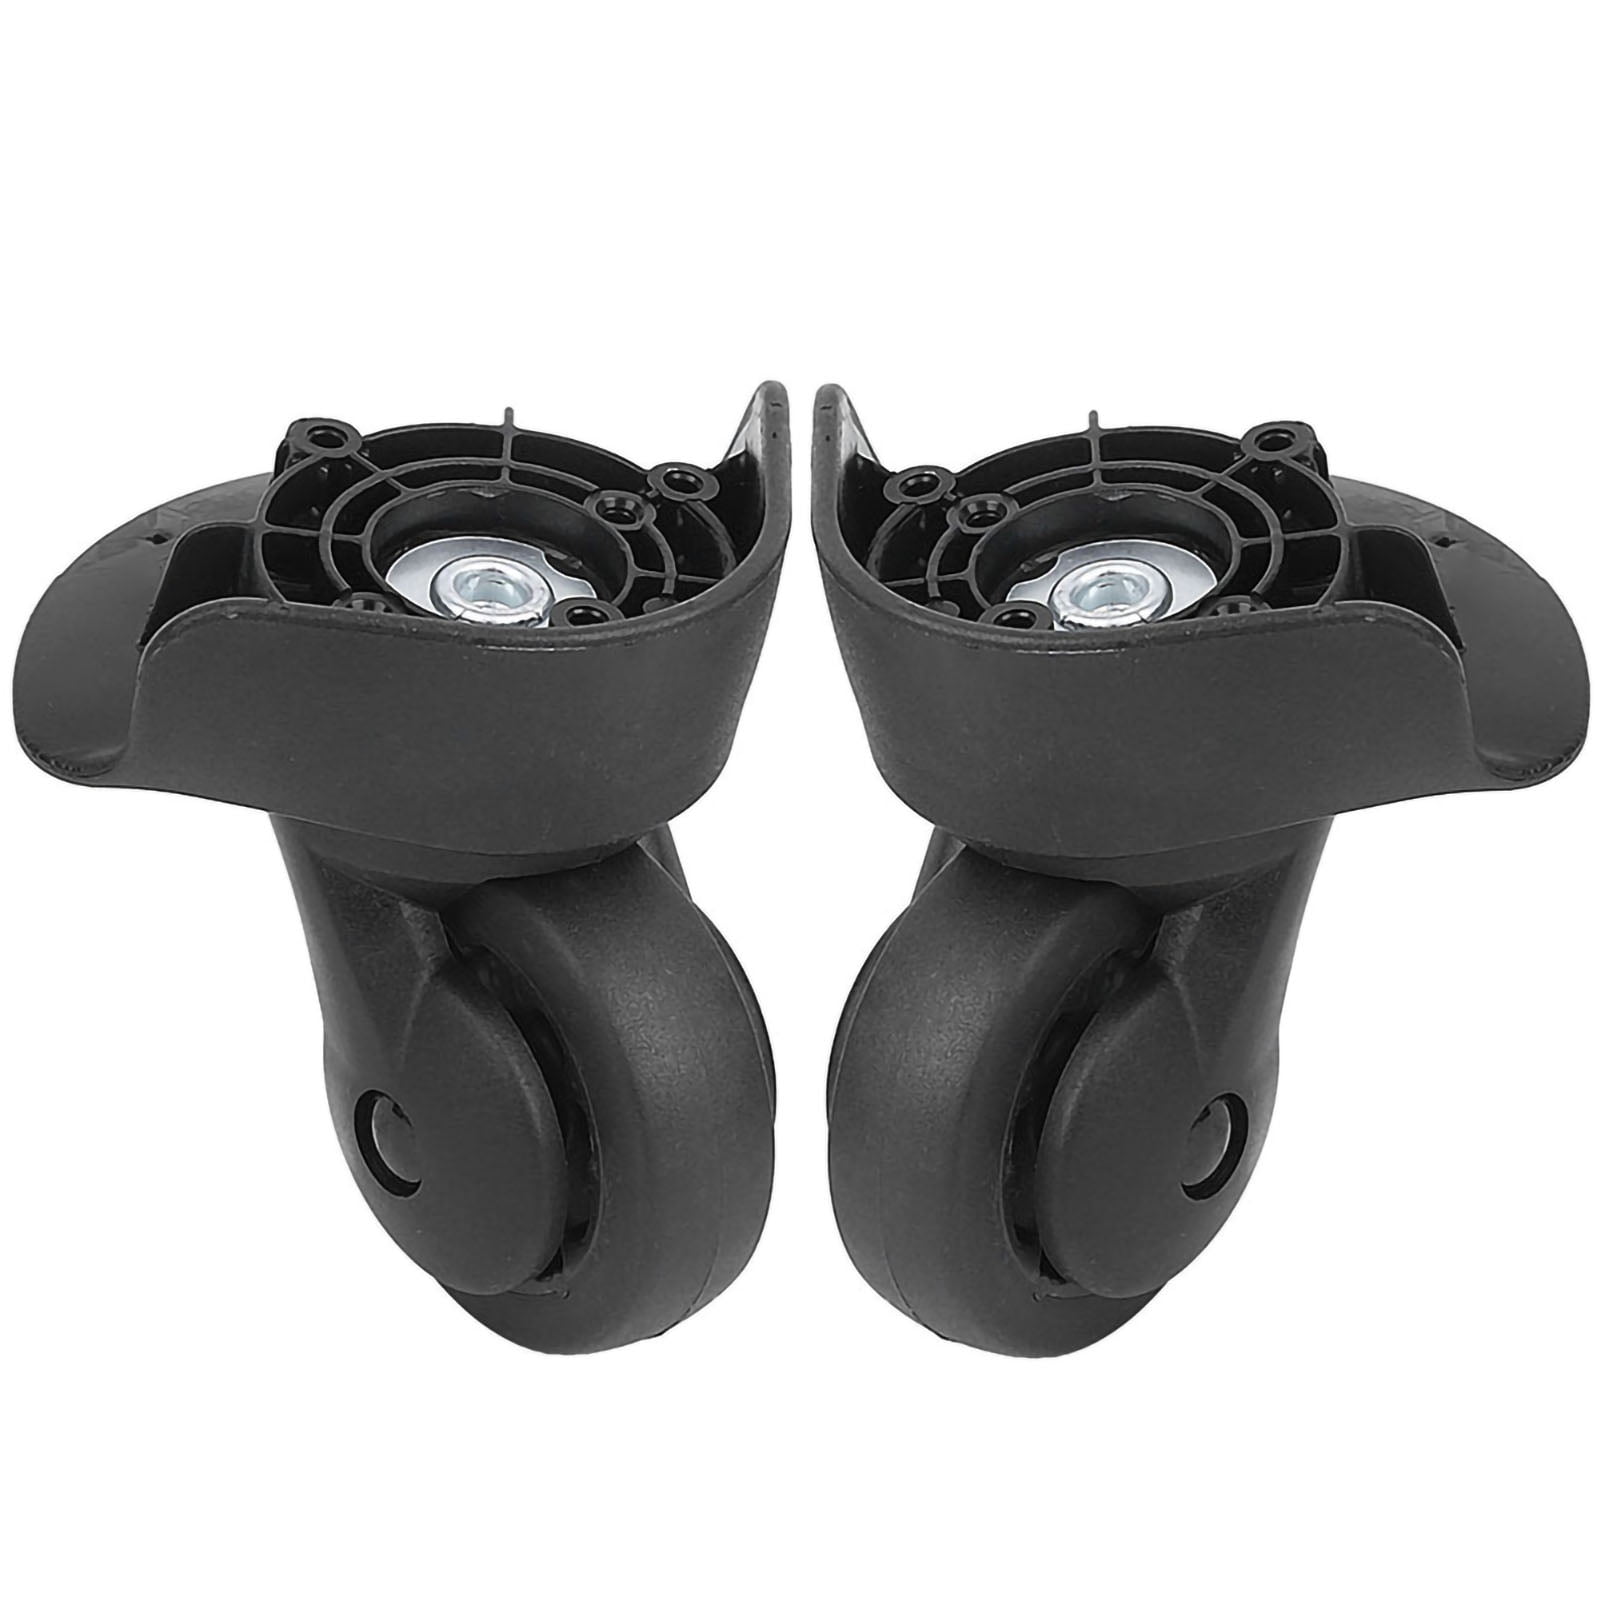 Luggage Suitcase Wheels,Pack of 2 Swivel Wheel Replacement Spinner ...